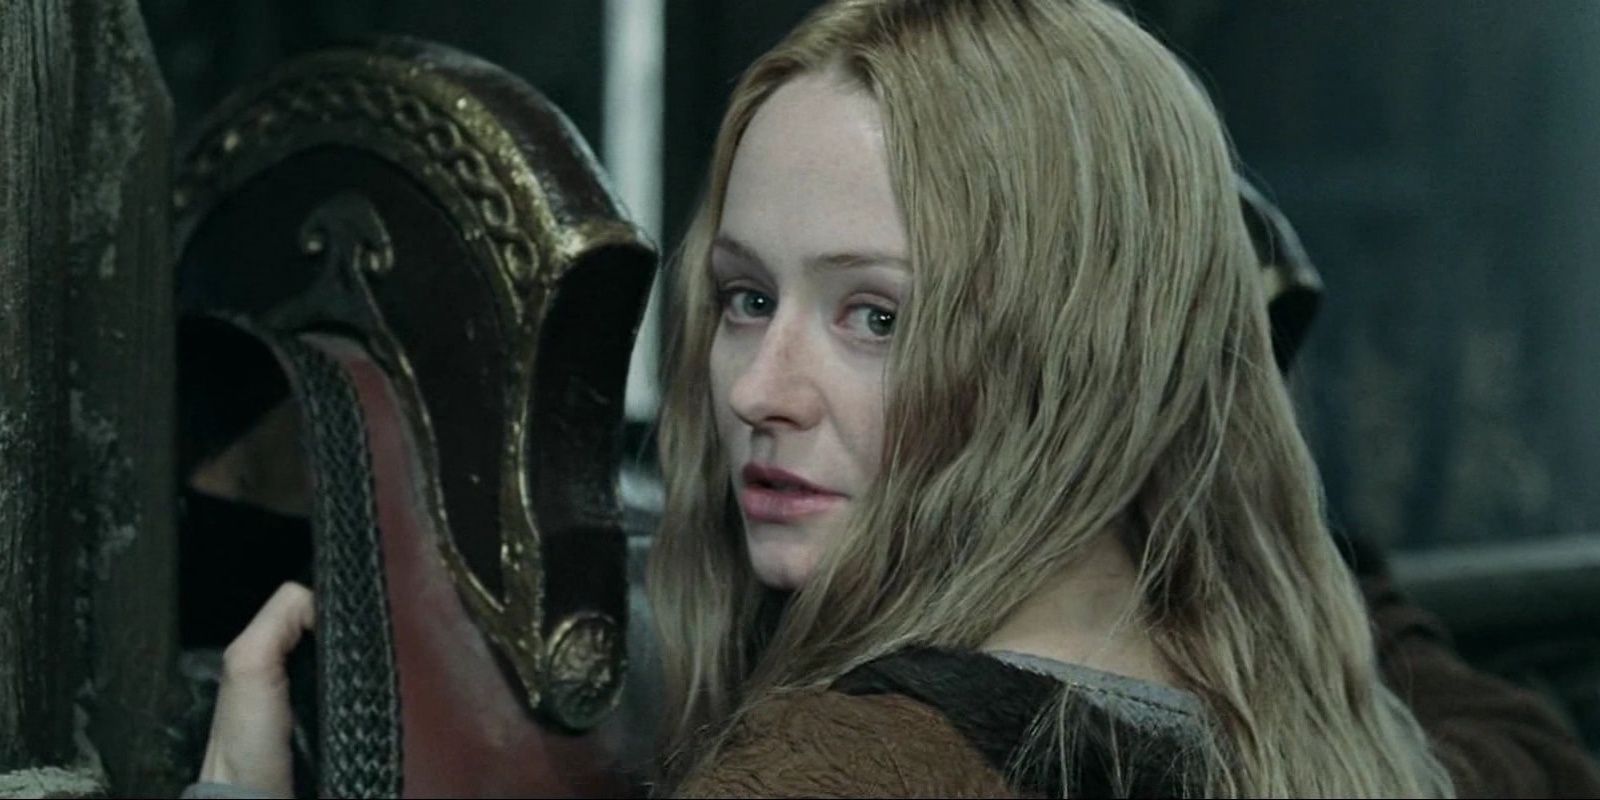 Eowyn cleaning a helmet in Lord of the Rings